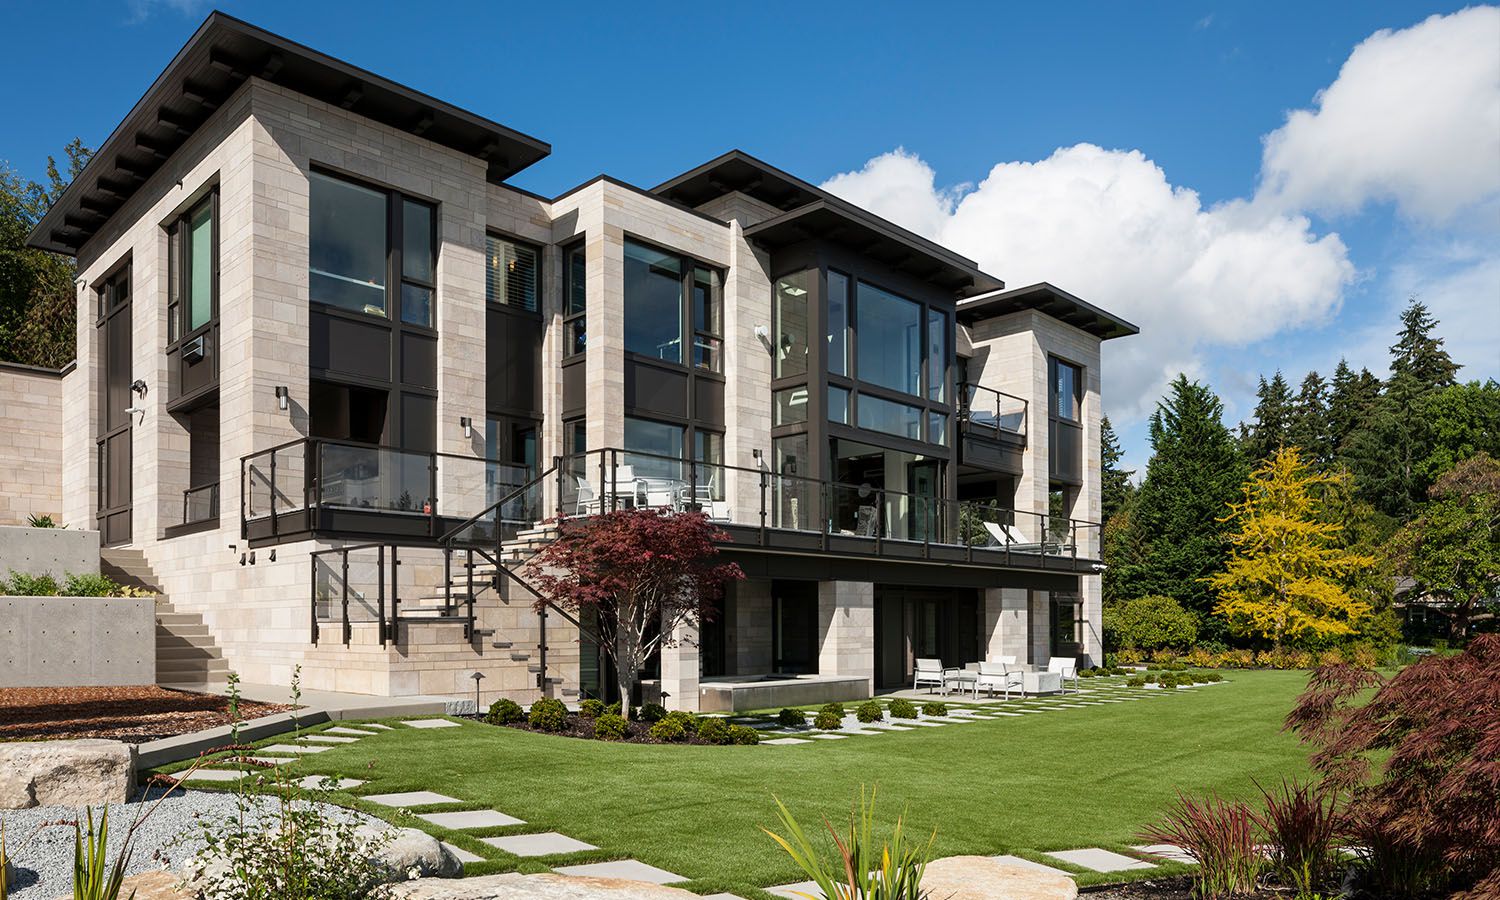 This Meydenbauer custom family home is designed for an active life.